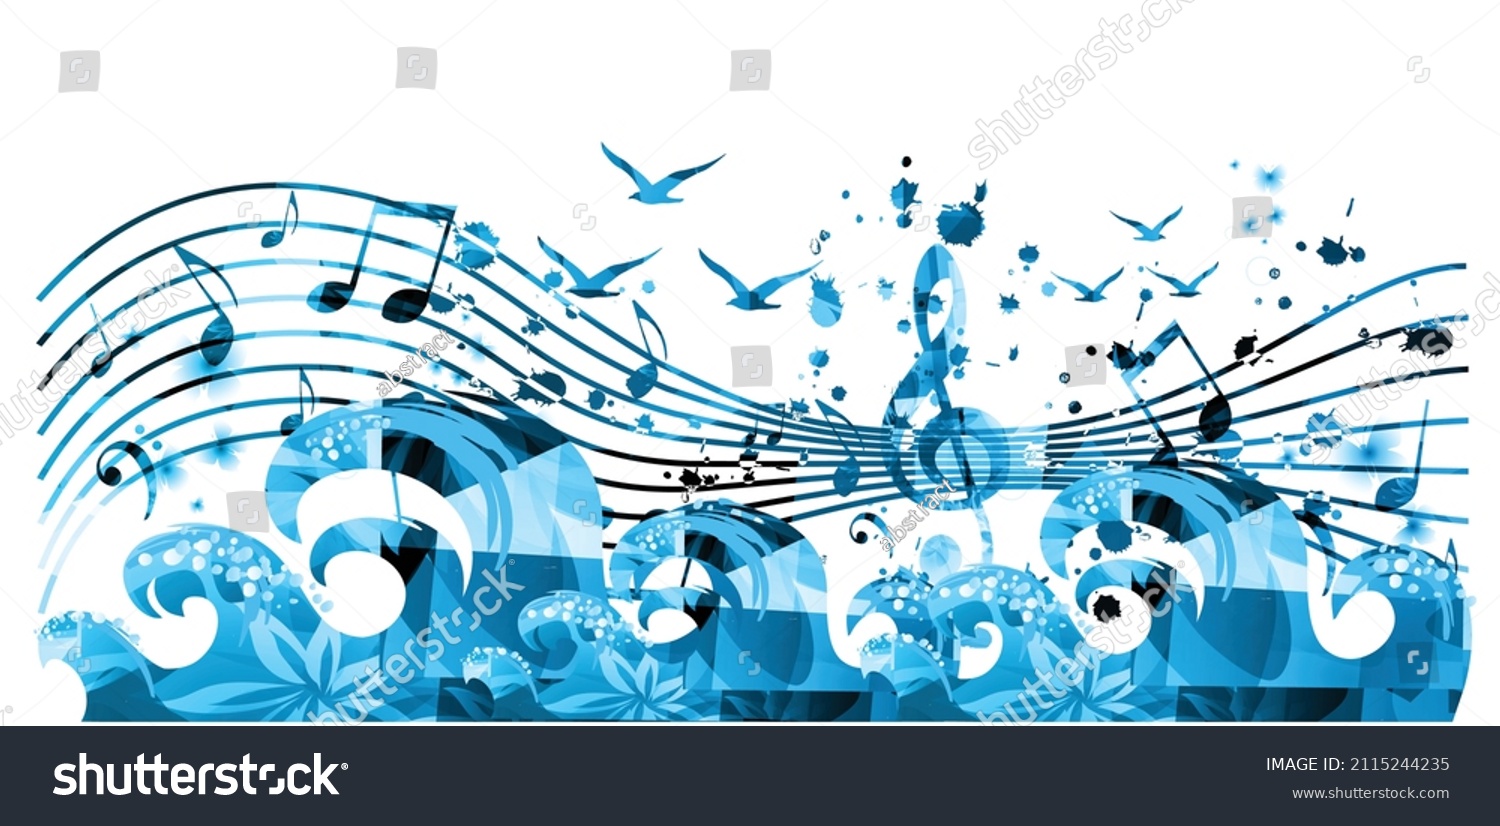 SVG of Musical poster with musical notes, waves and gulls isolated vector illustration. Inspirational music, composing, creating music. Design for live concert events, music festivals, shows, party flyers svg